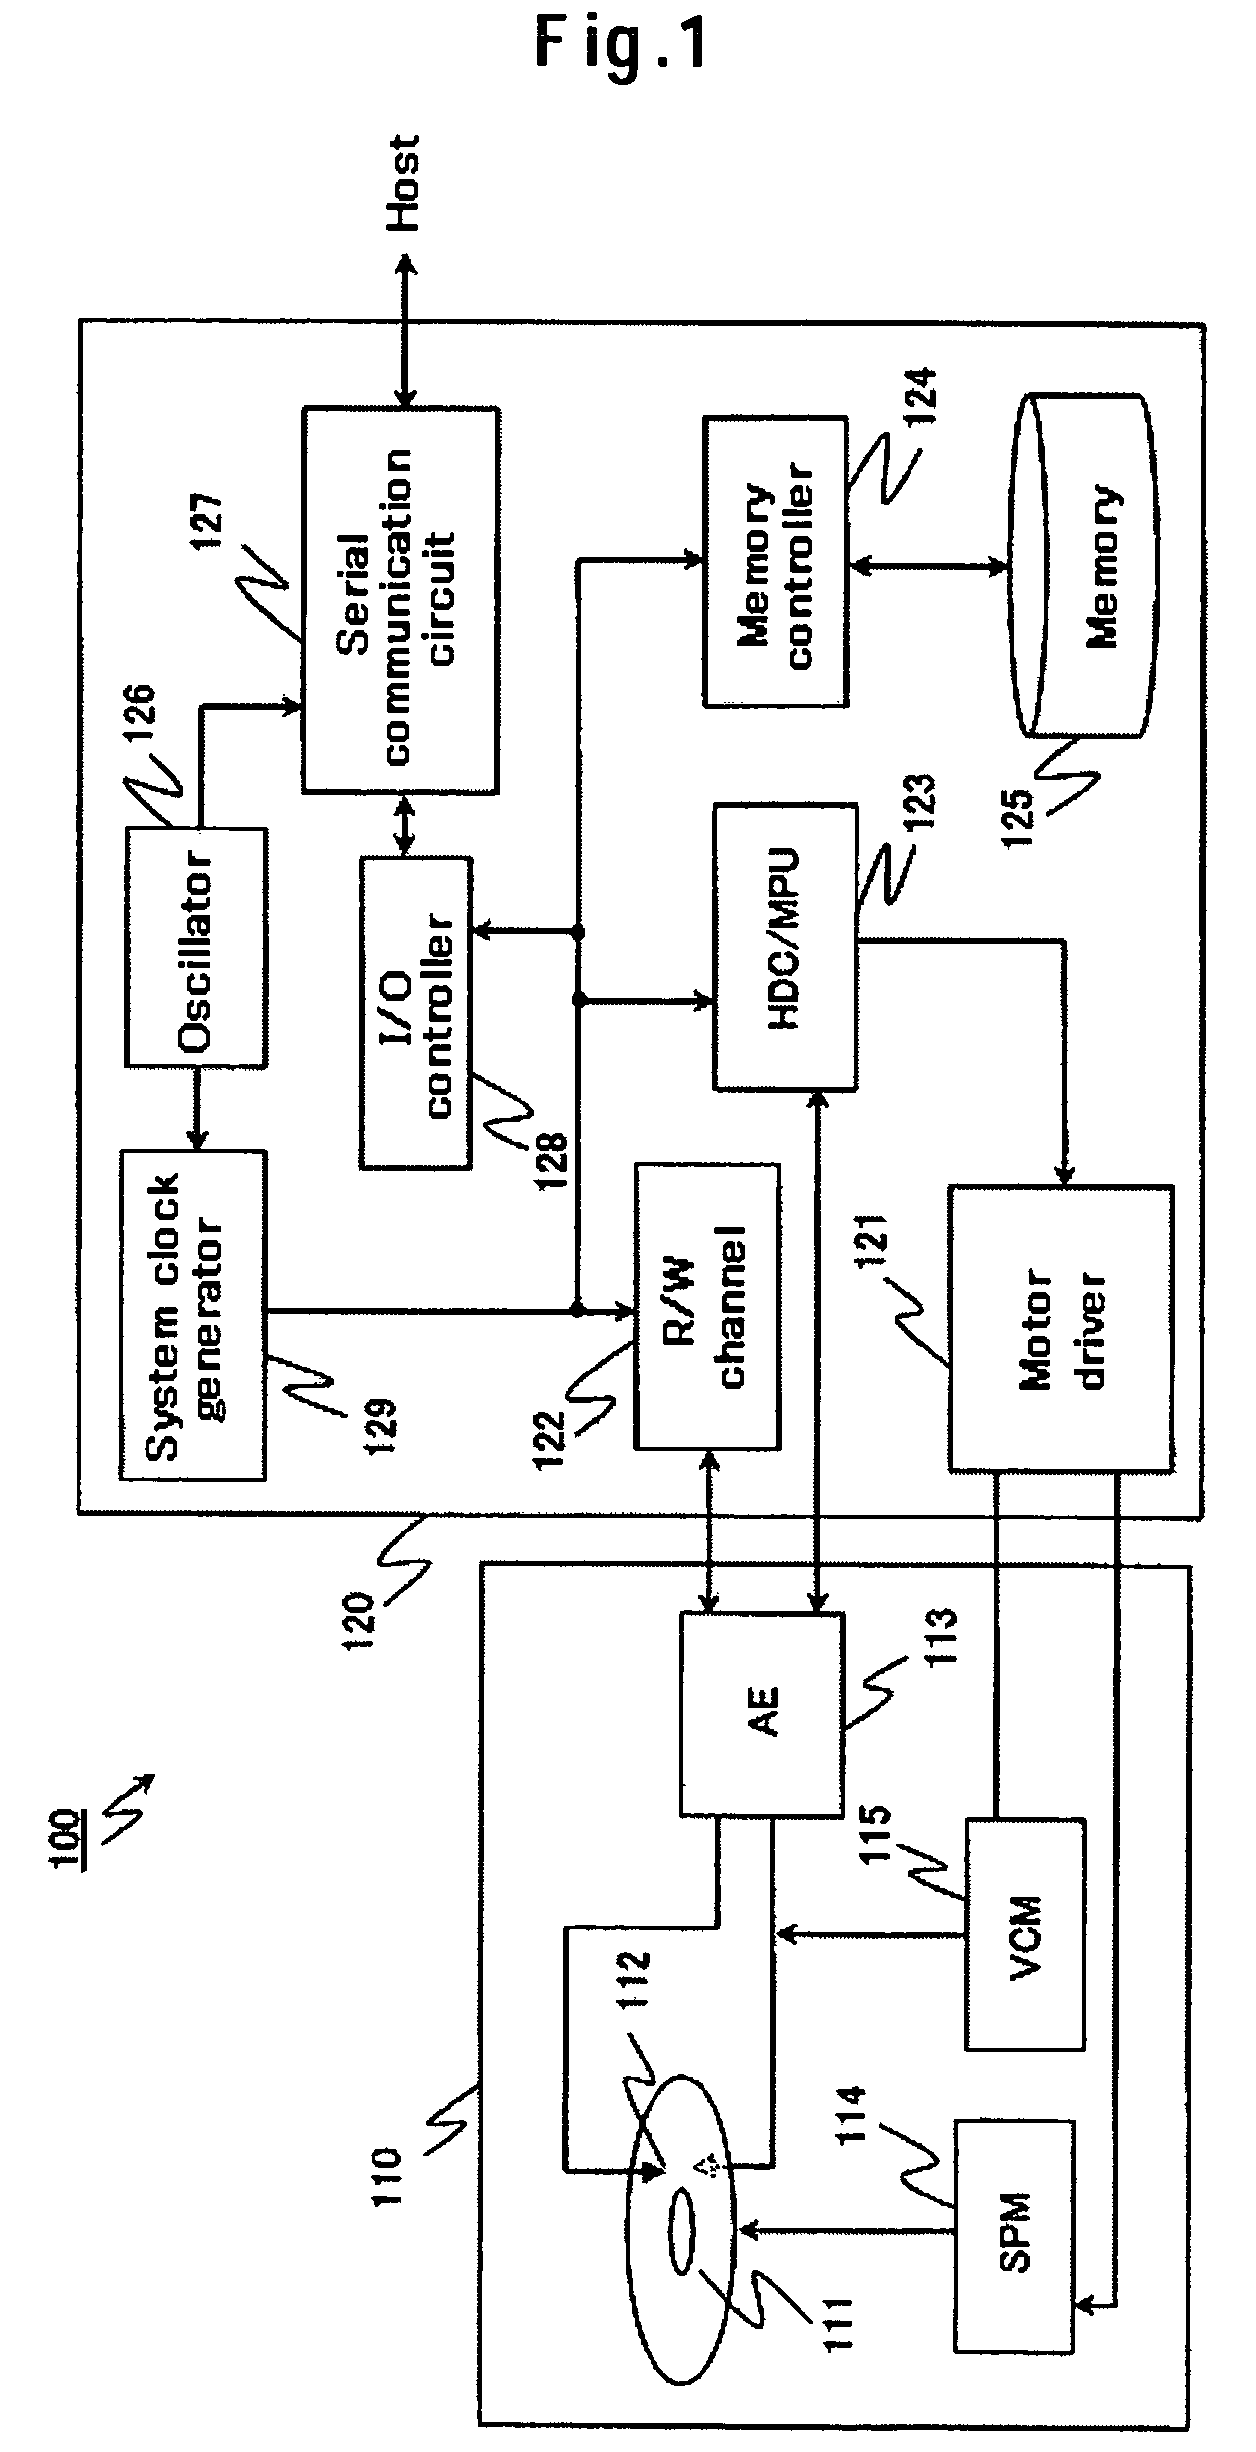 Disk device for serial communication and method of controlling the same